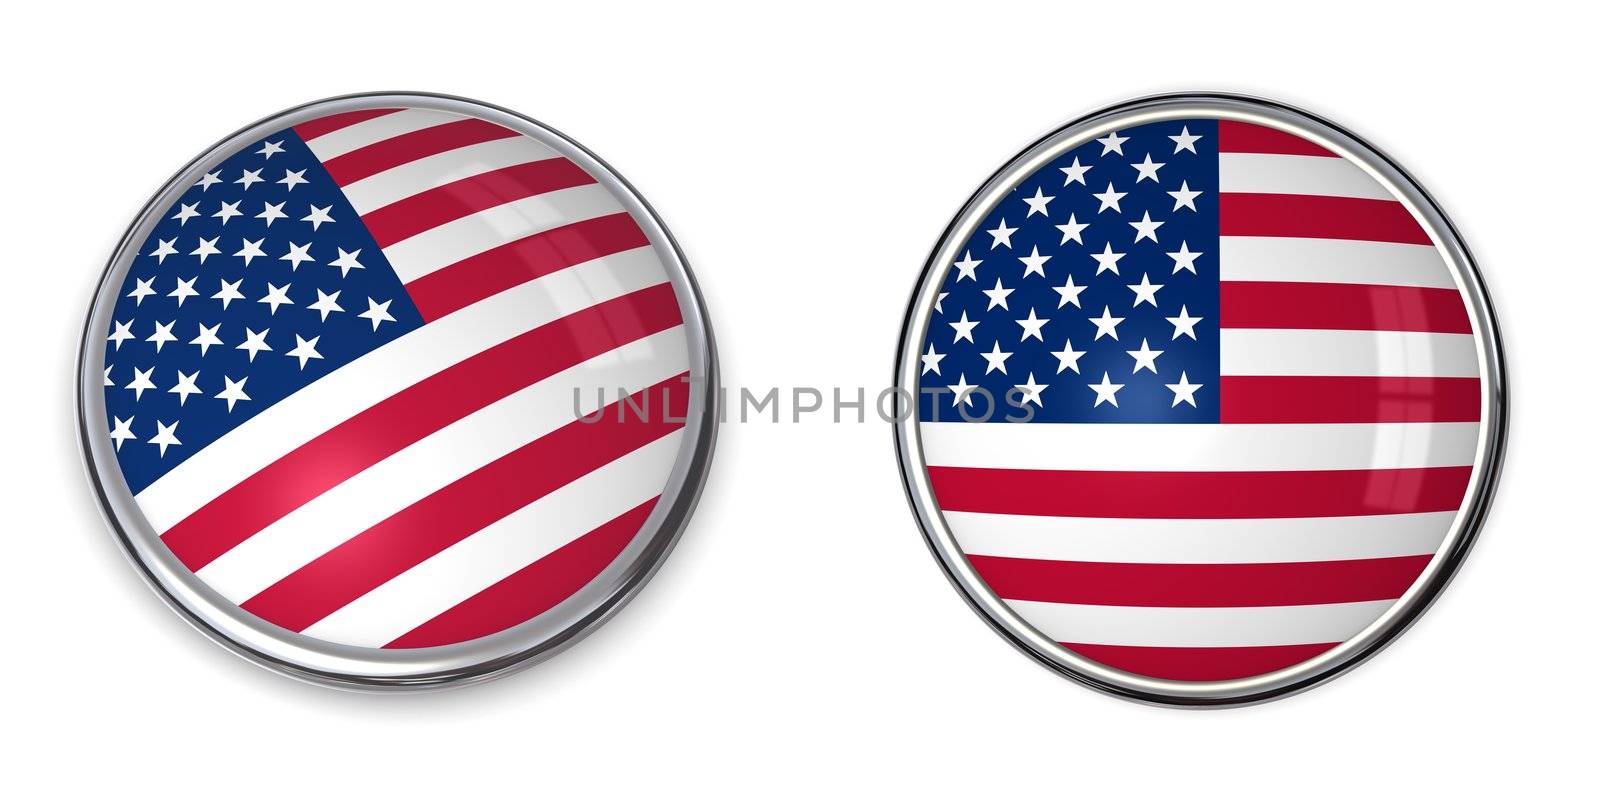 button style banner of united states of america